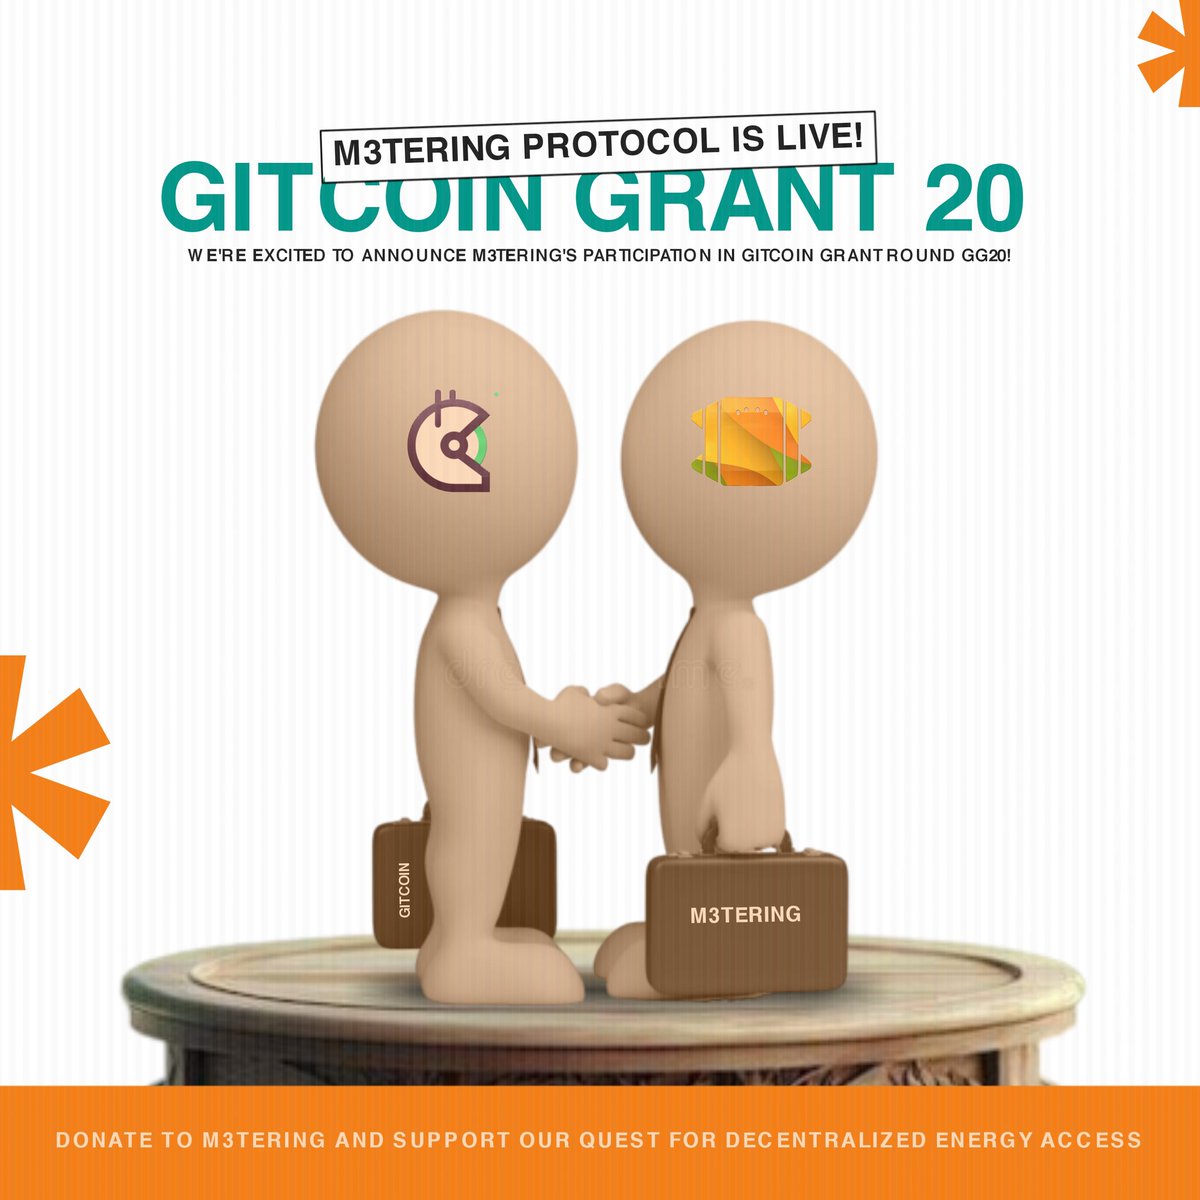 We're excited to announce our participation in @gitcoin Grant Round GG20! ⚡️ Our mission is to fight energy poverty by bringing clean solar power to underserved communities worldwide. explorer.gitcoin.co/?utm_source=gr…